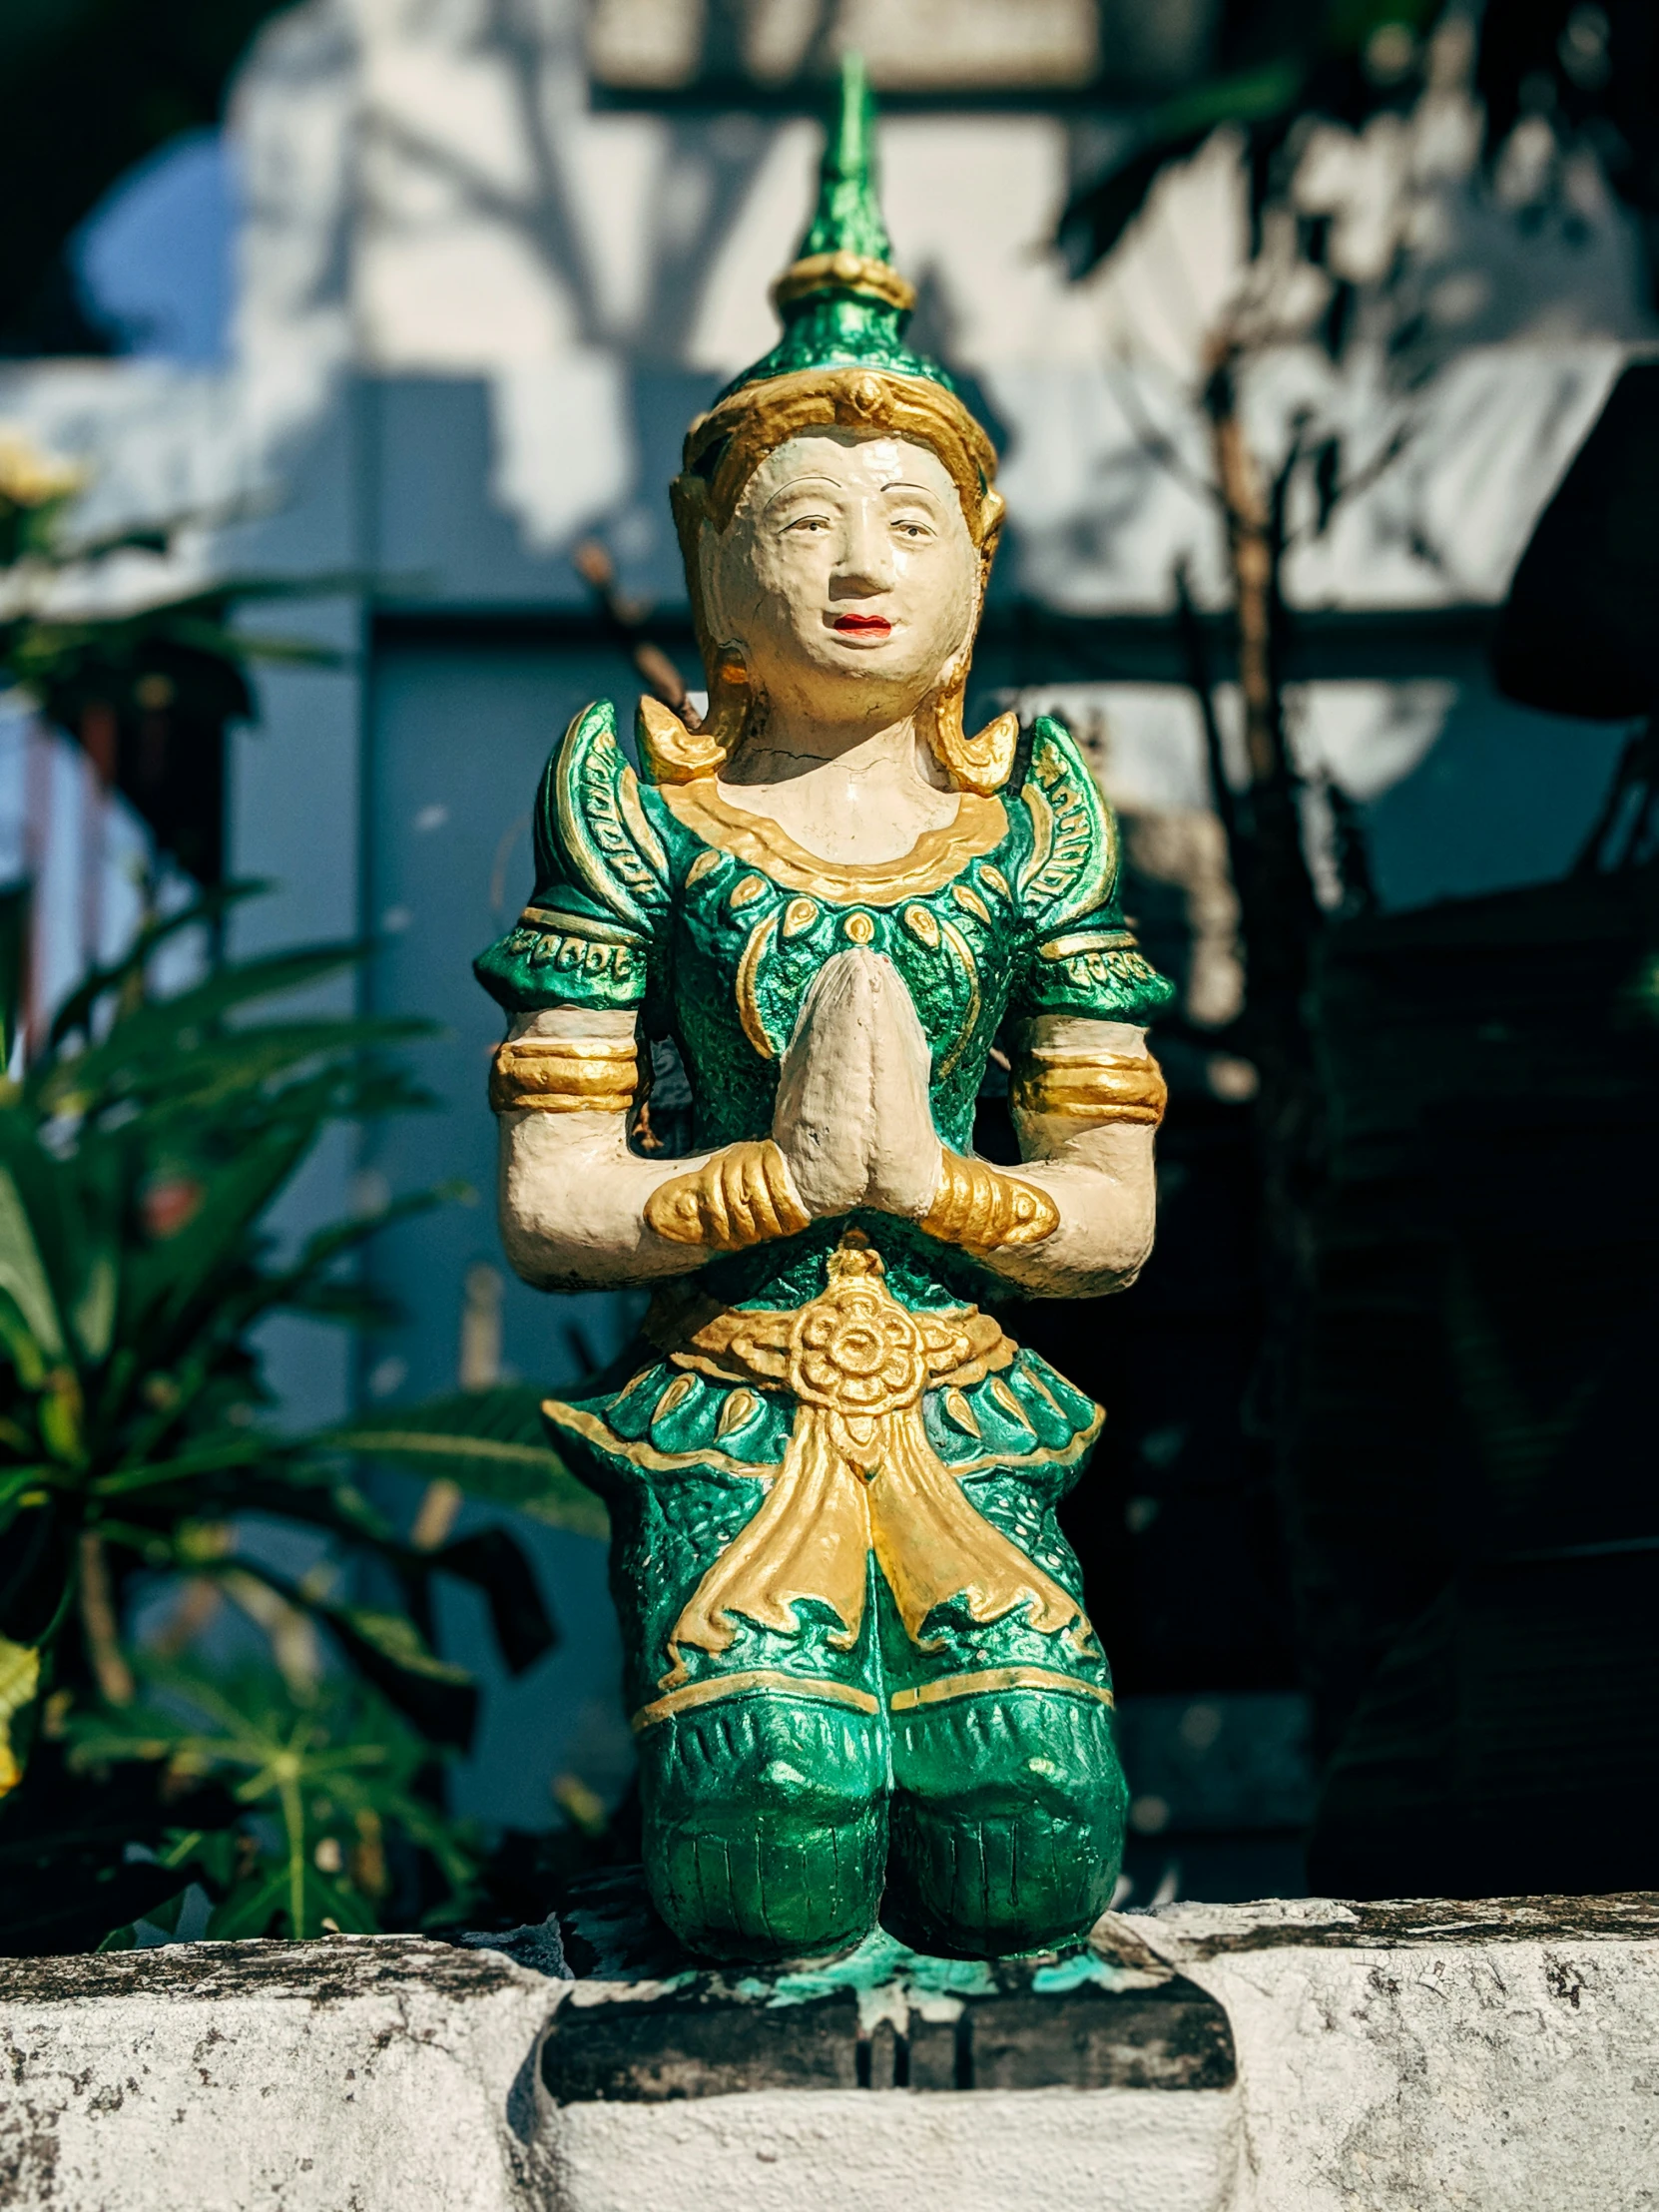 an image of a statue of buddha on the street